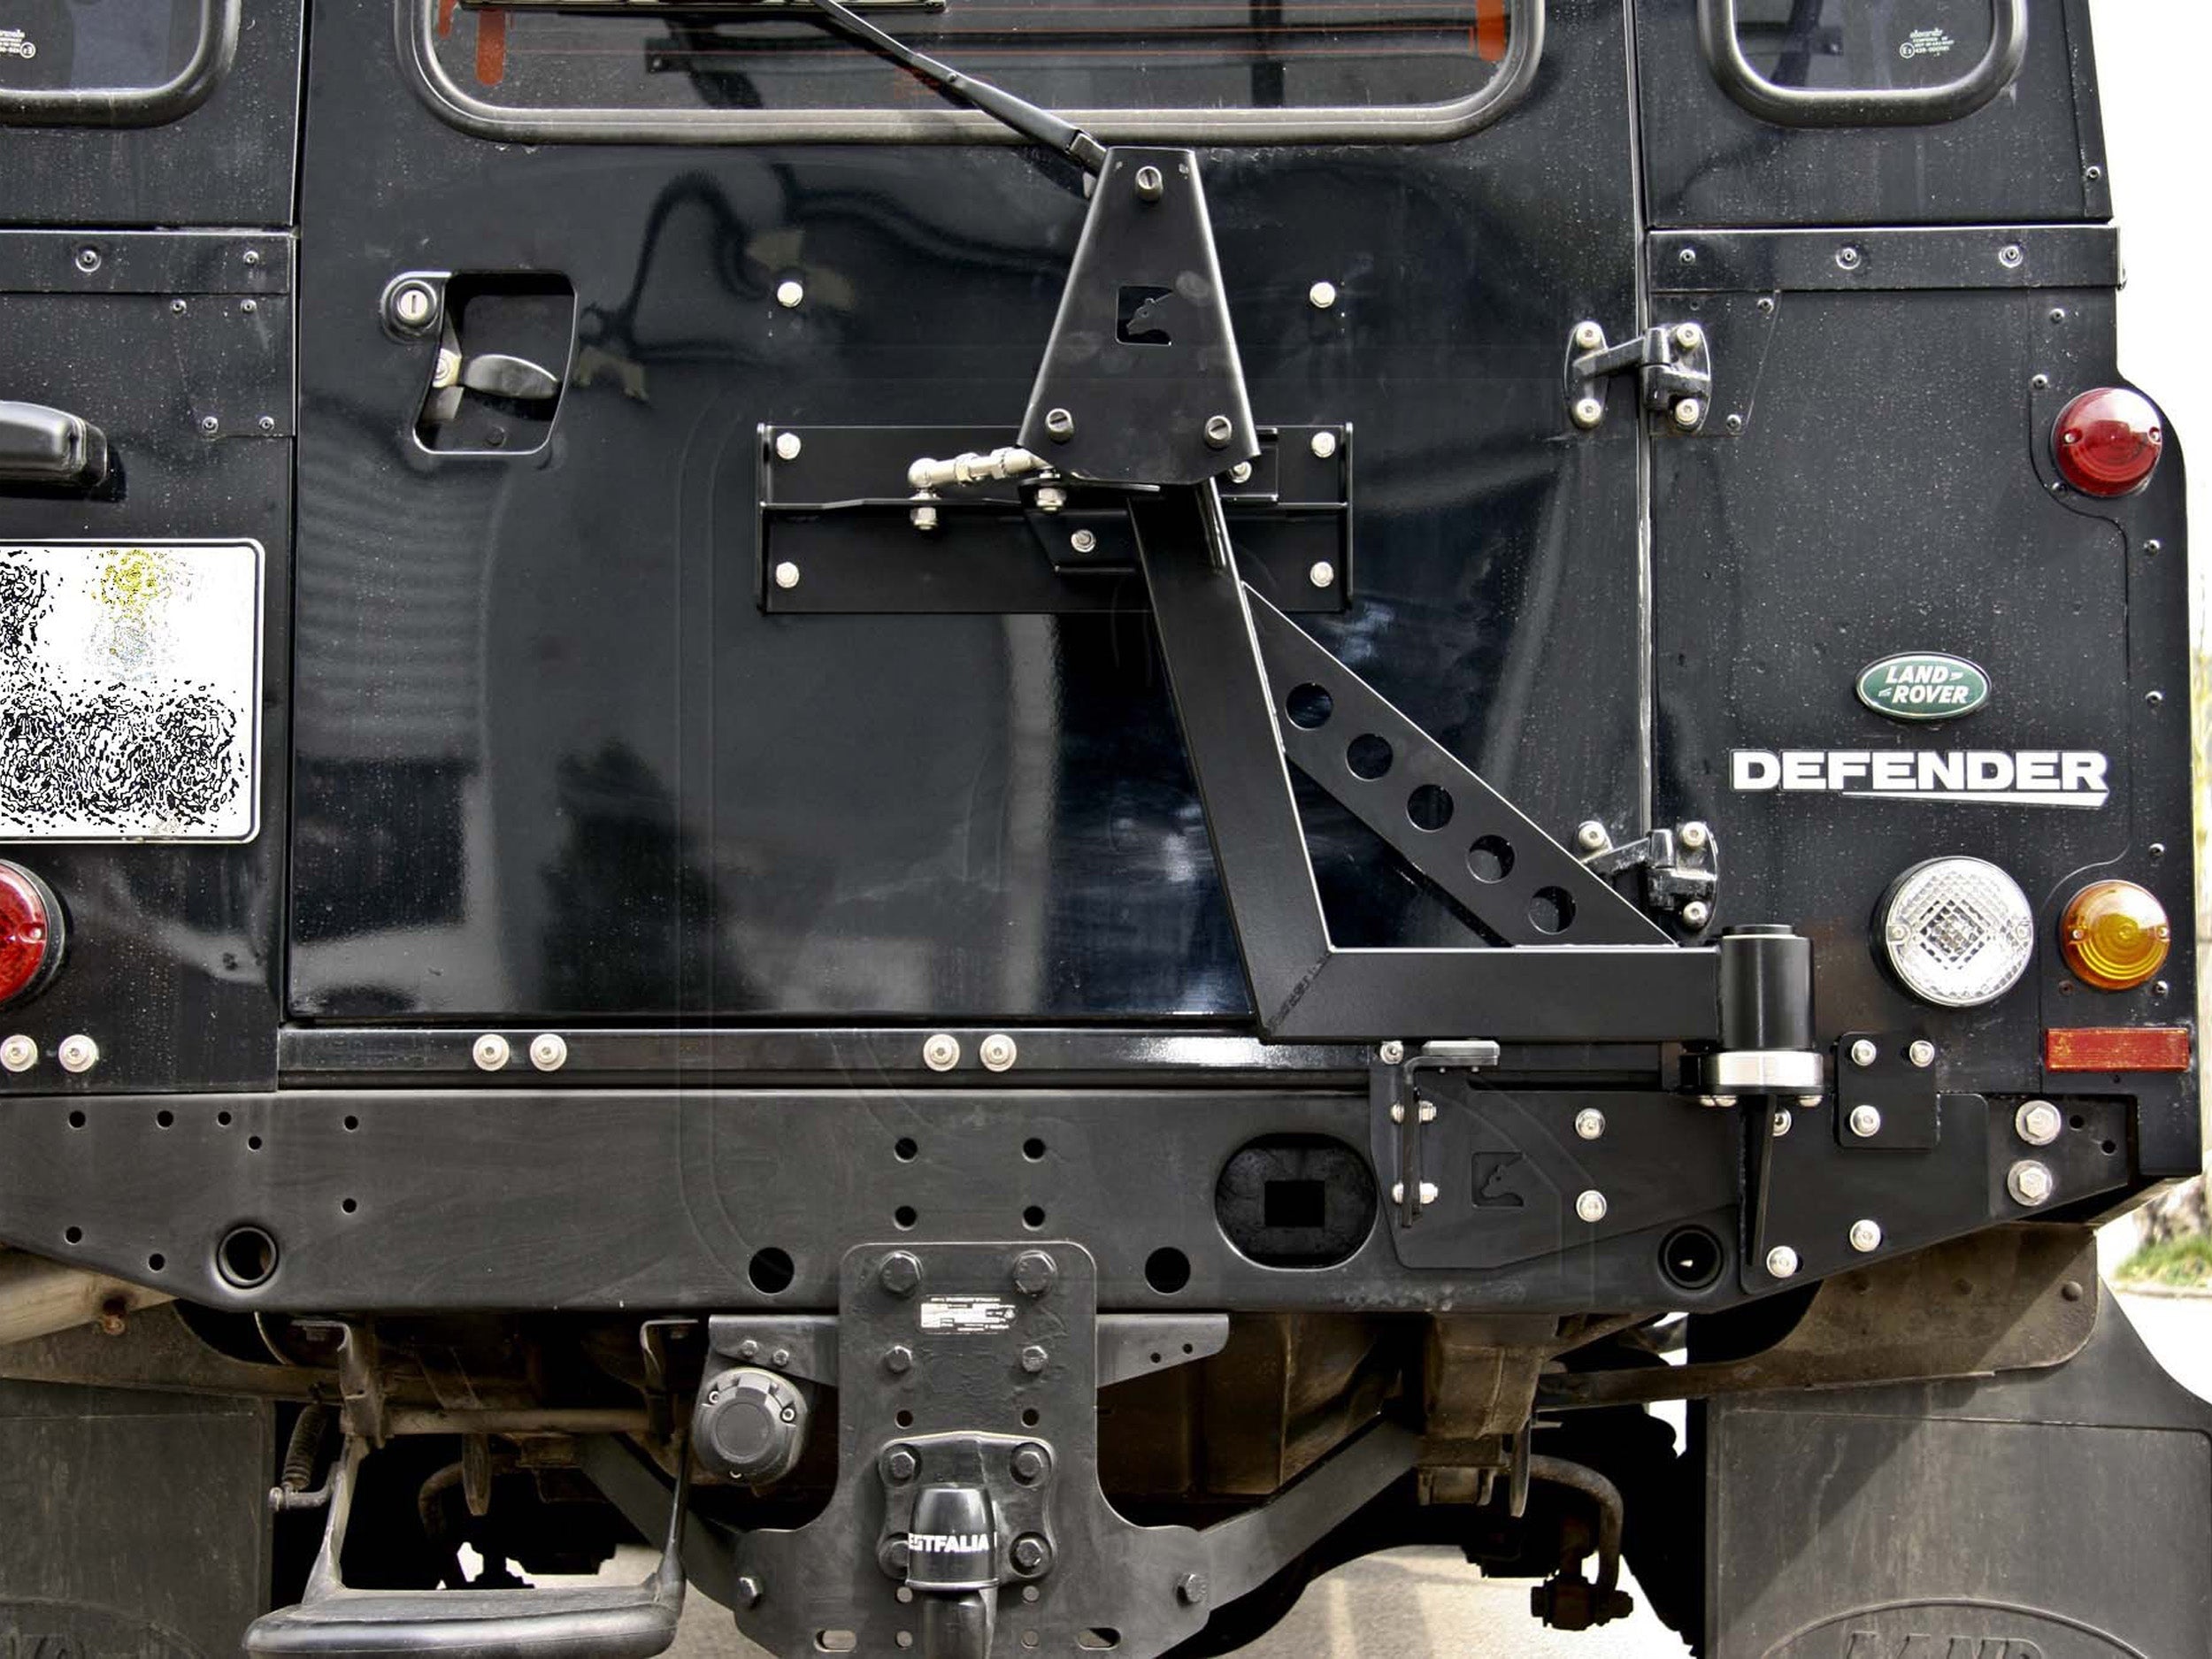 Defender Station Wagon Swing Away Tire Carrier (stainless steel & black powdercoated) - for Land Rover 90/110